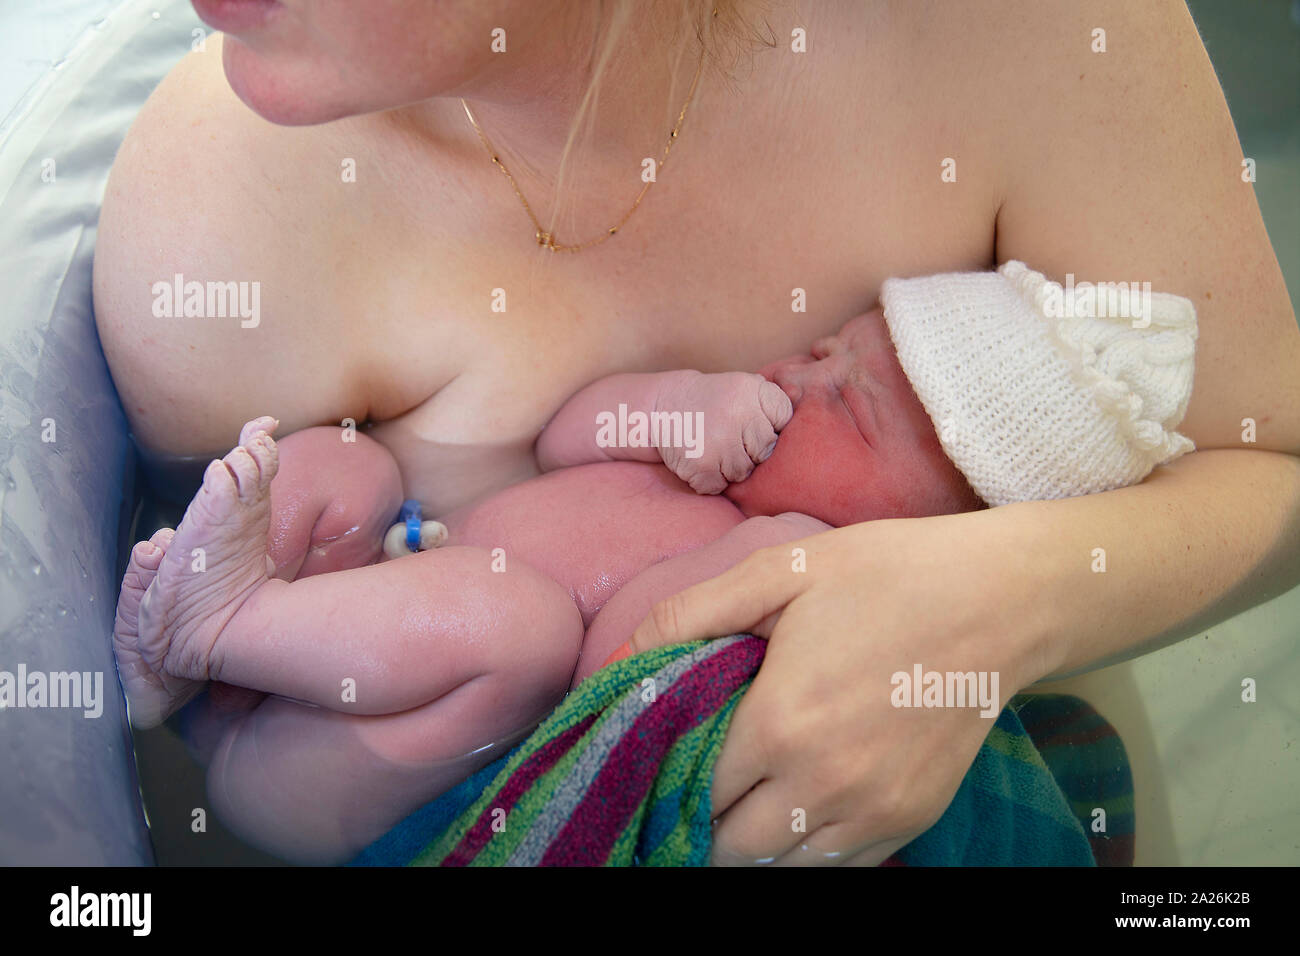 A newborn baby being embraced by their mother after being born Stock Photo